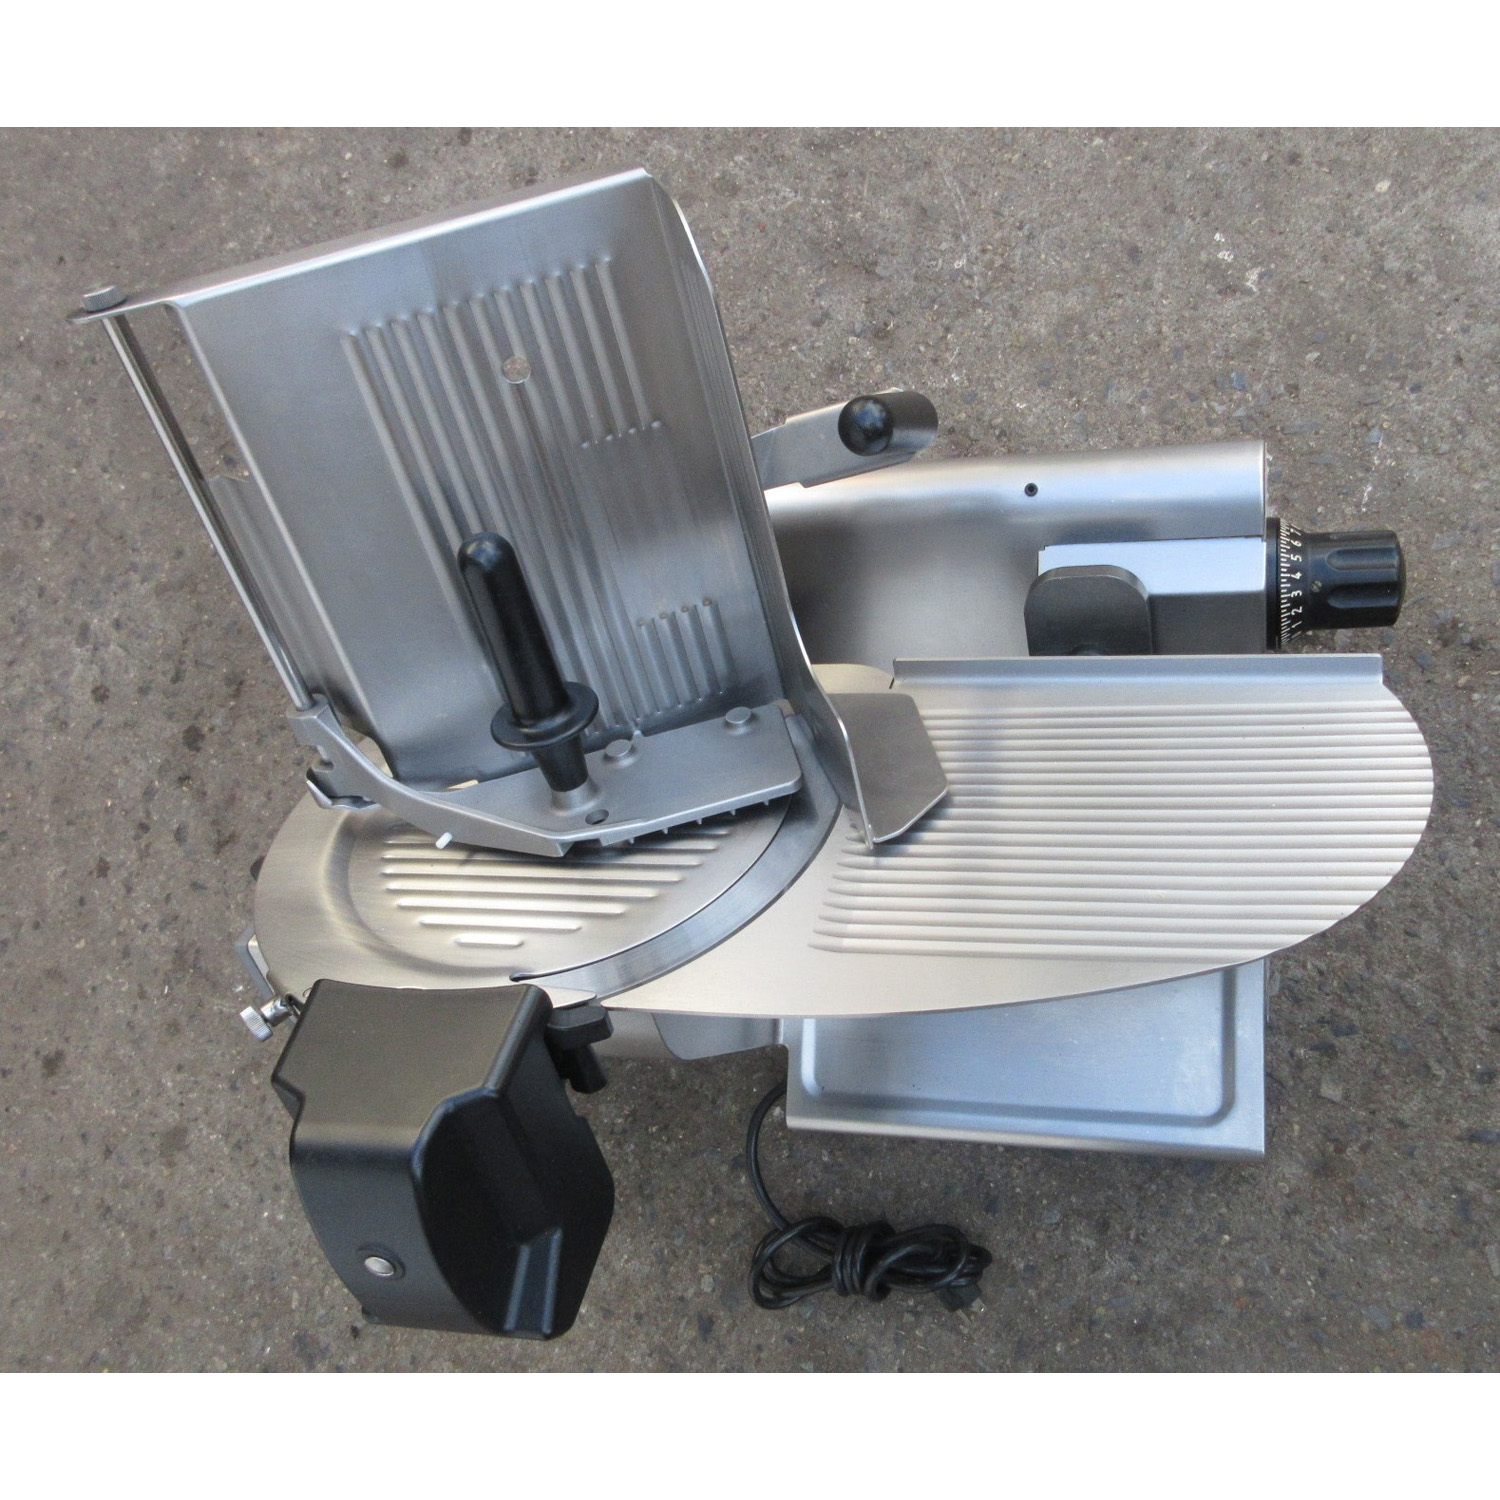 Globe 3600N Meat Slicer, Used Great Condition image 2